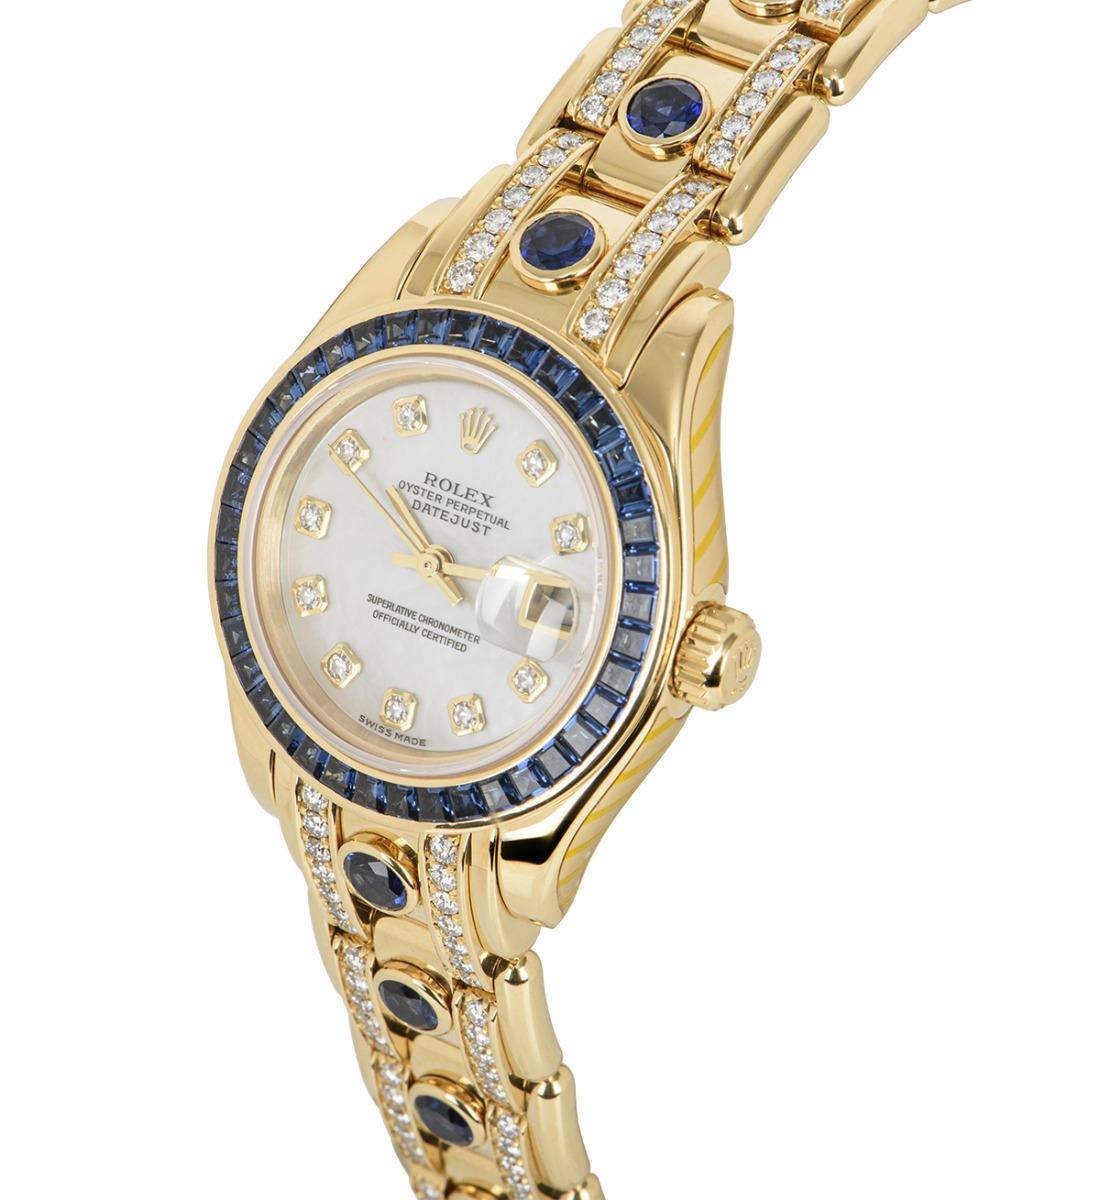 A Yellow Gold 29mm Datejust Pearlmaster by Rolex. Features a mother of pearl dial set with 10 round brilliant cut diamond hour markers and 40 baguette cut sapphires set on the bezel. Fitted with a Pearlmaster bracelet set with 13 rub-over set